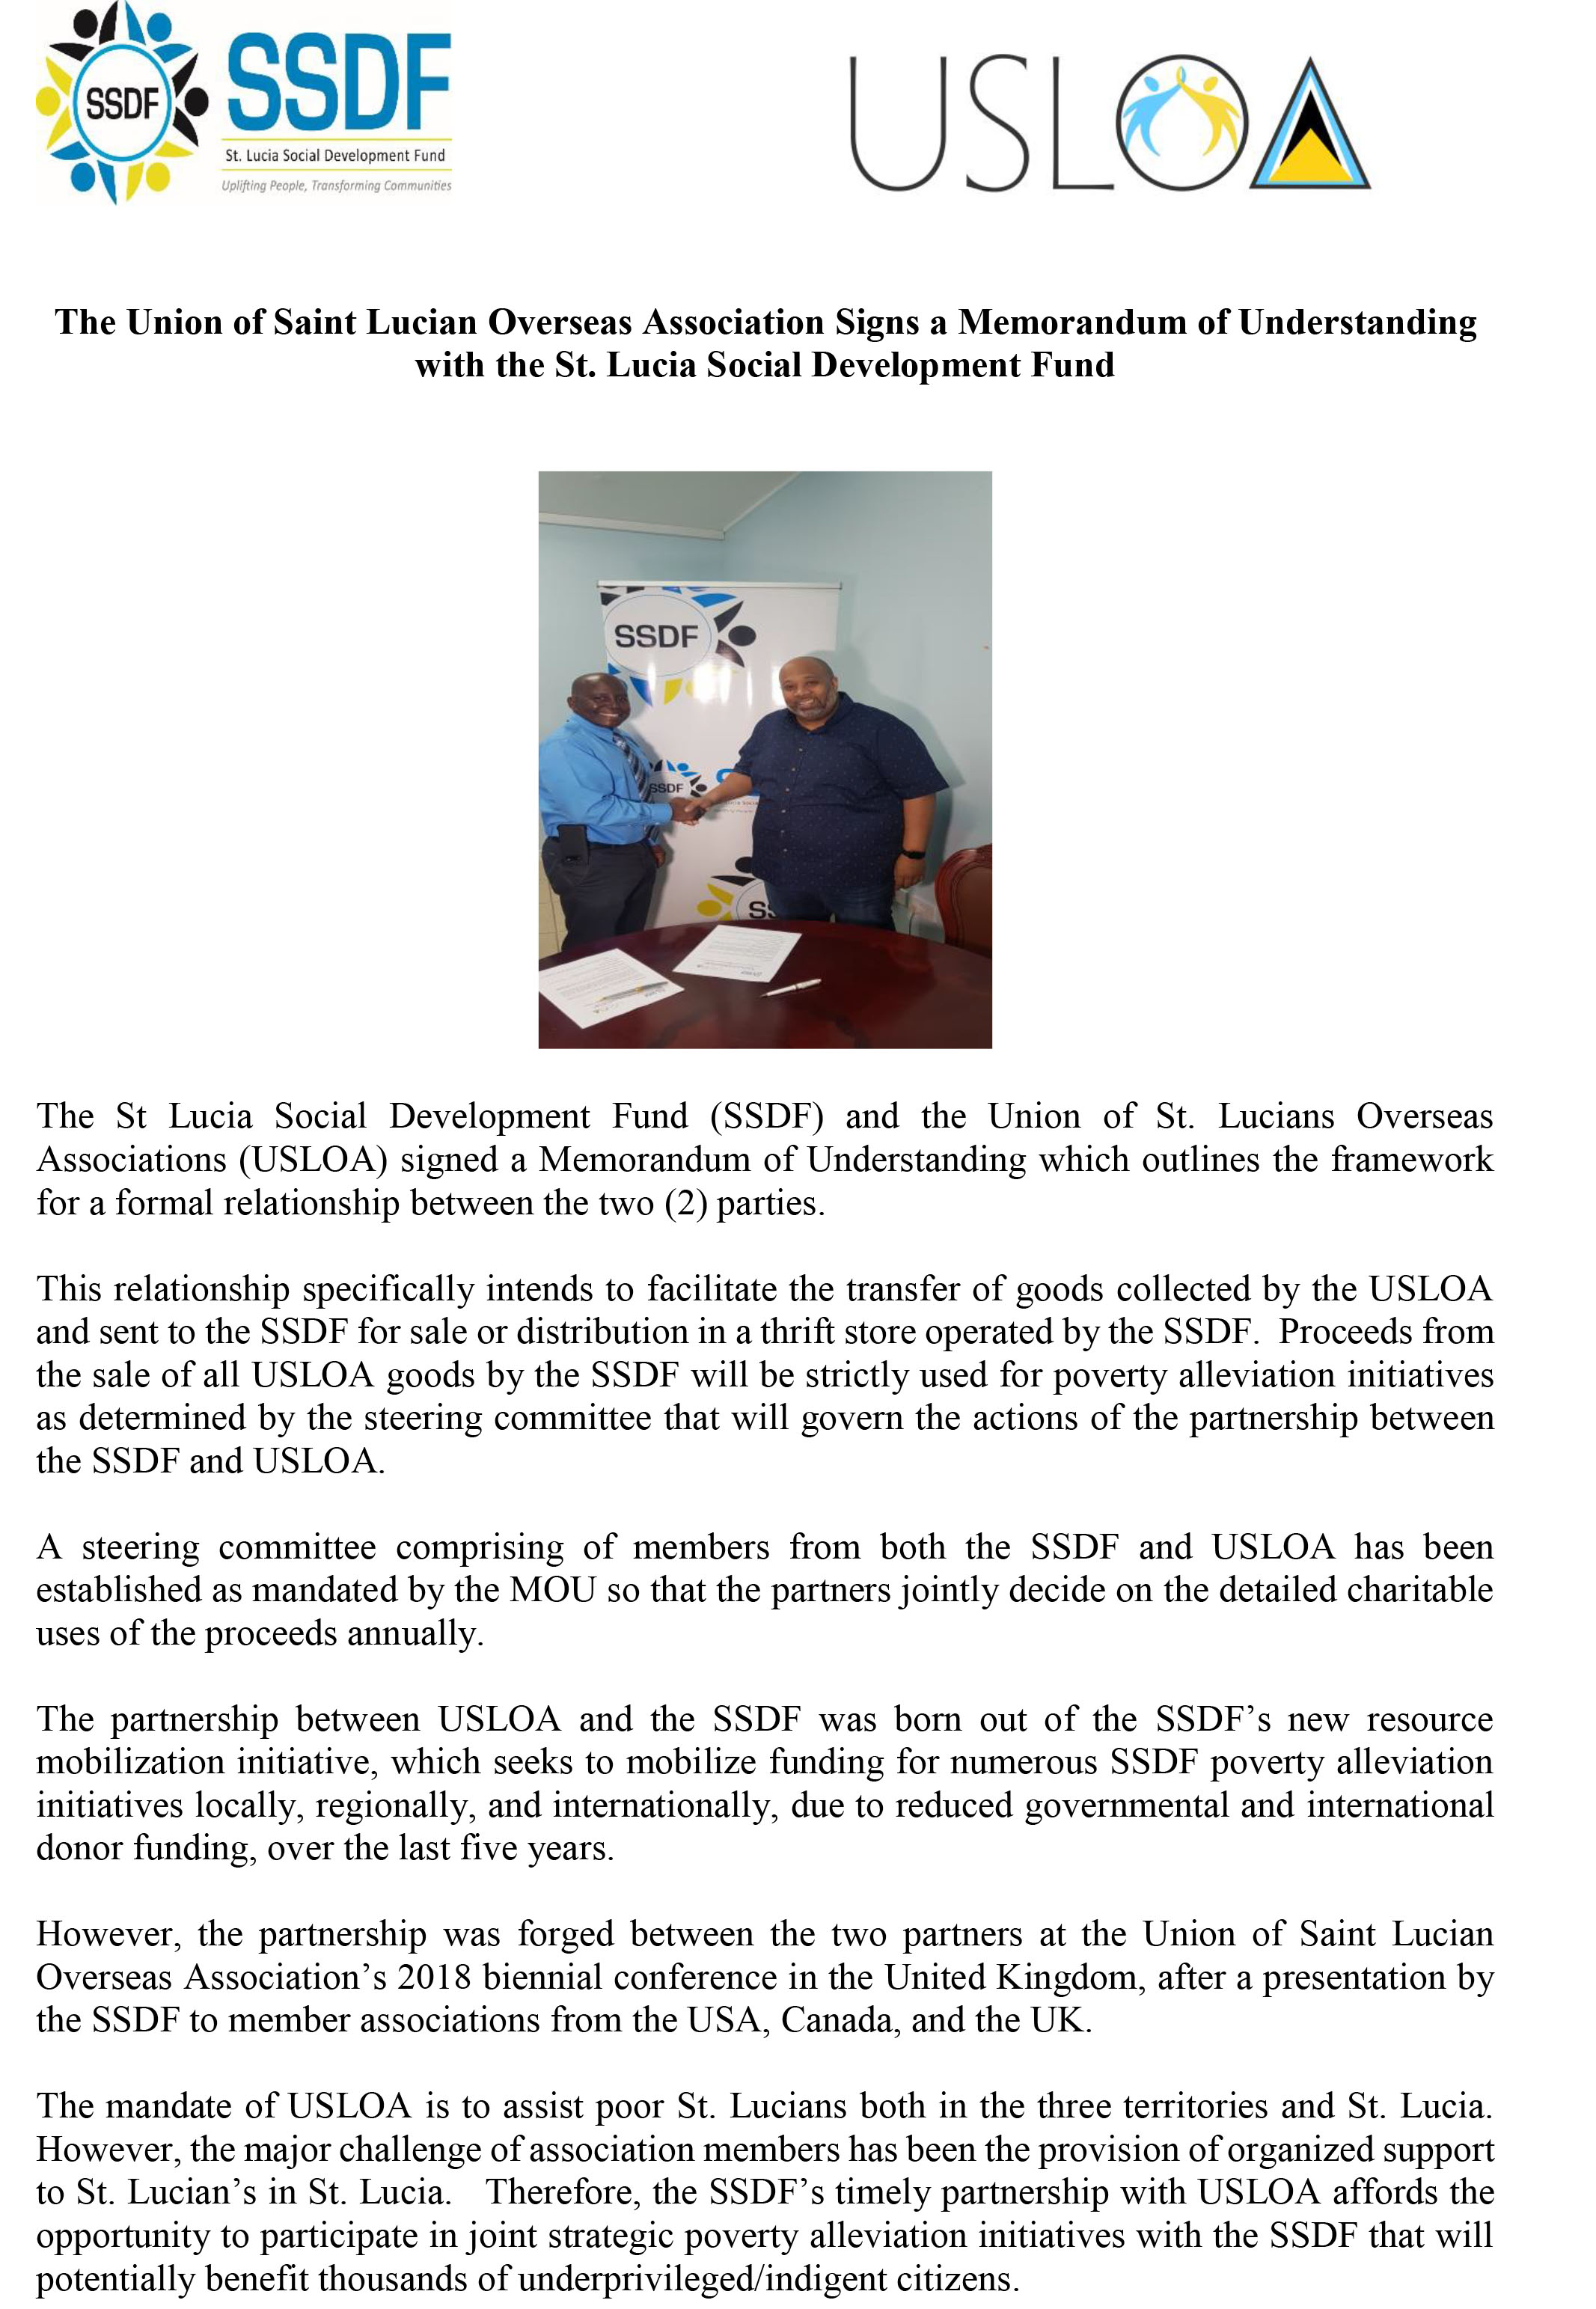 Press Release Signing of MOU with USLOA